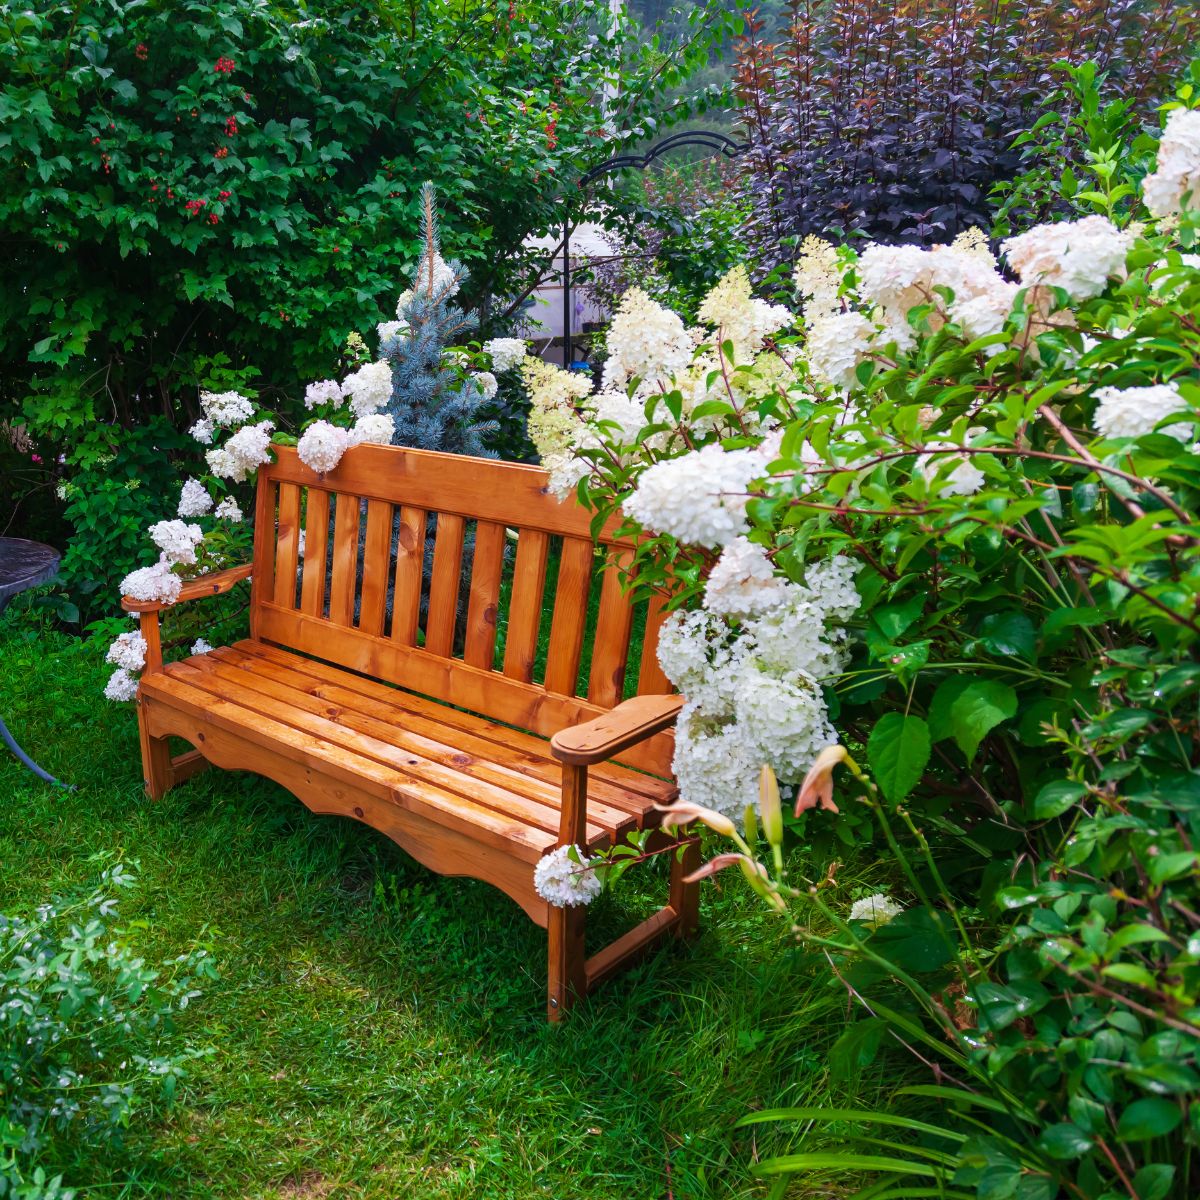 A beautiful wooden bench set against a large white hydrangea bush.